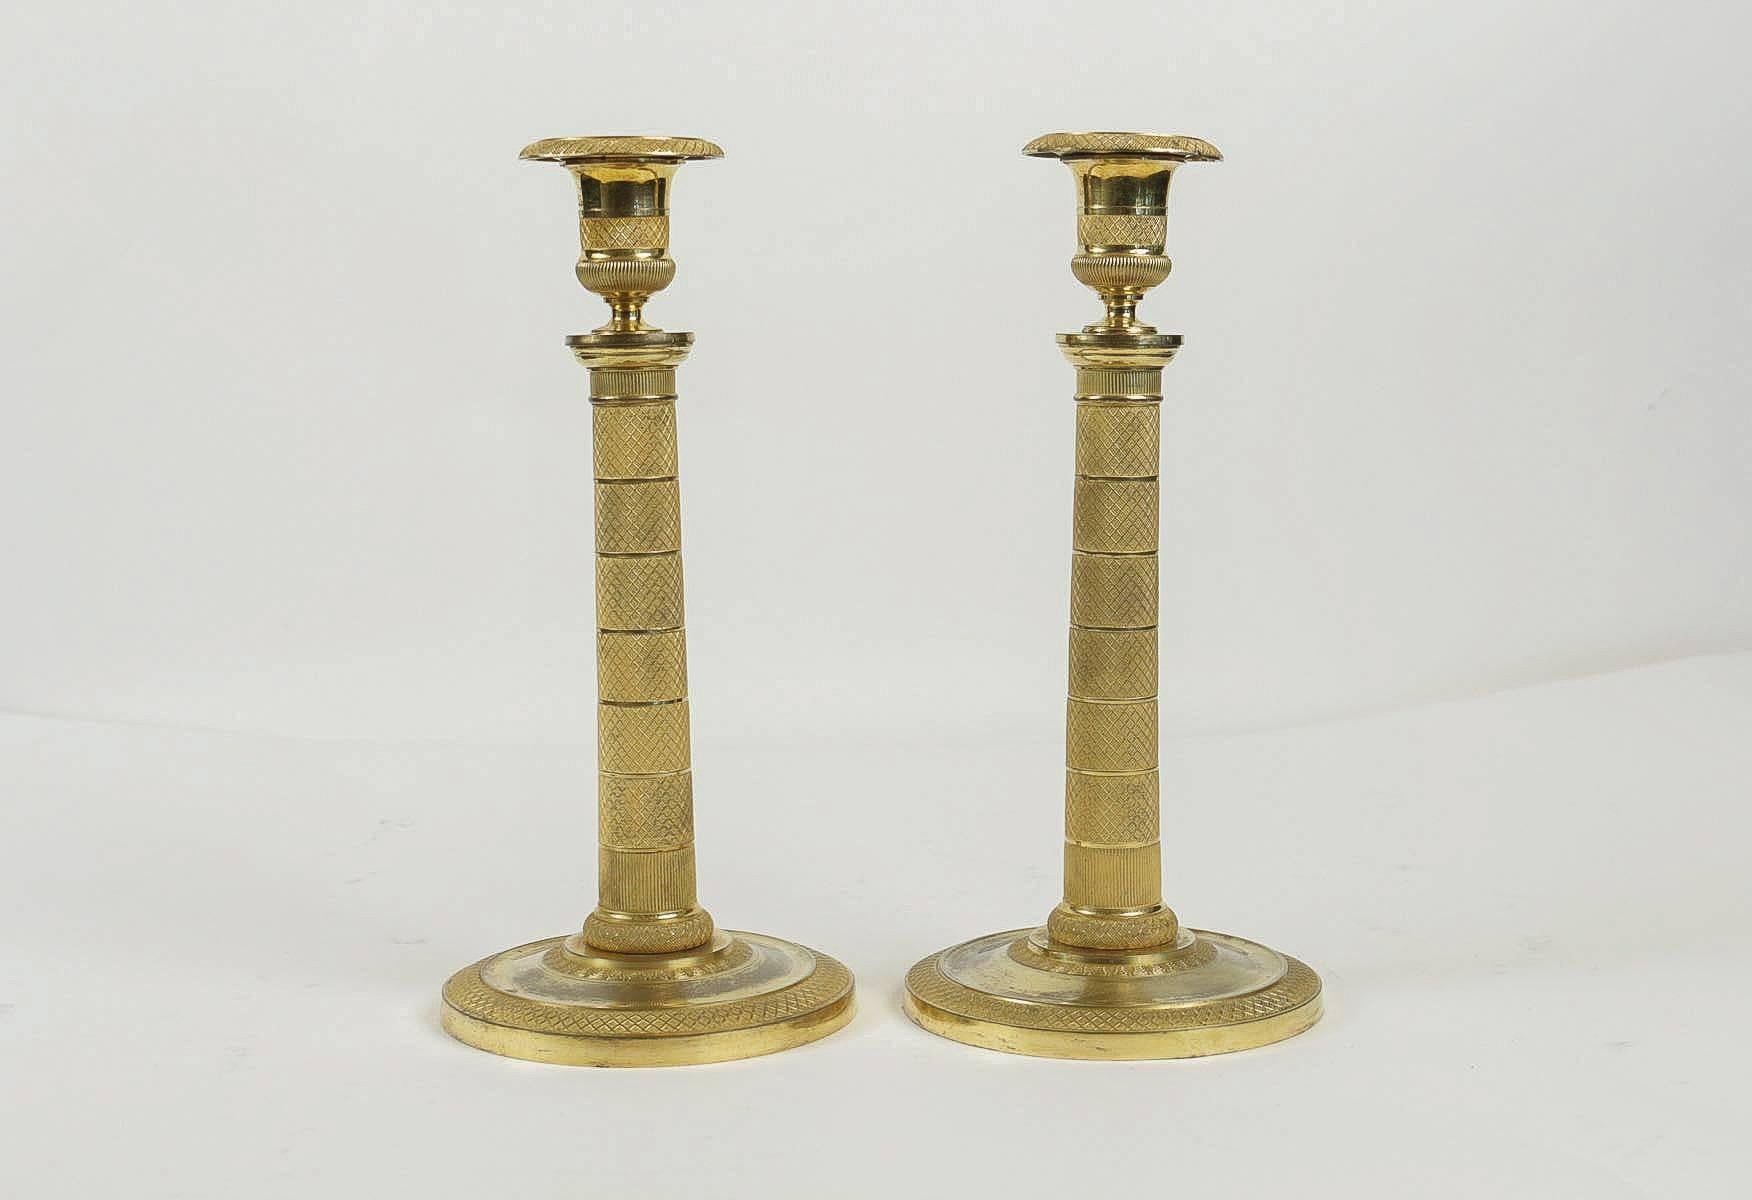 A gorgeous pair of Empire period candlesticks finely chiseled in very beautiful original gilding. The candlestick rests on a circular base,

early 19th century, French work, Empire period, circa 1810.

Dimensions: 9.84 in. H, 5.51 D circular